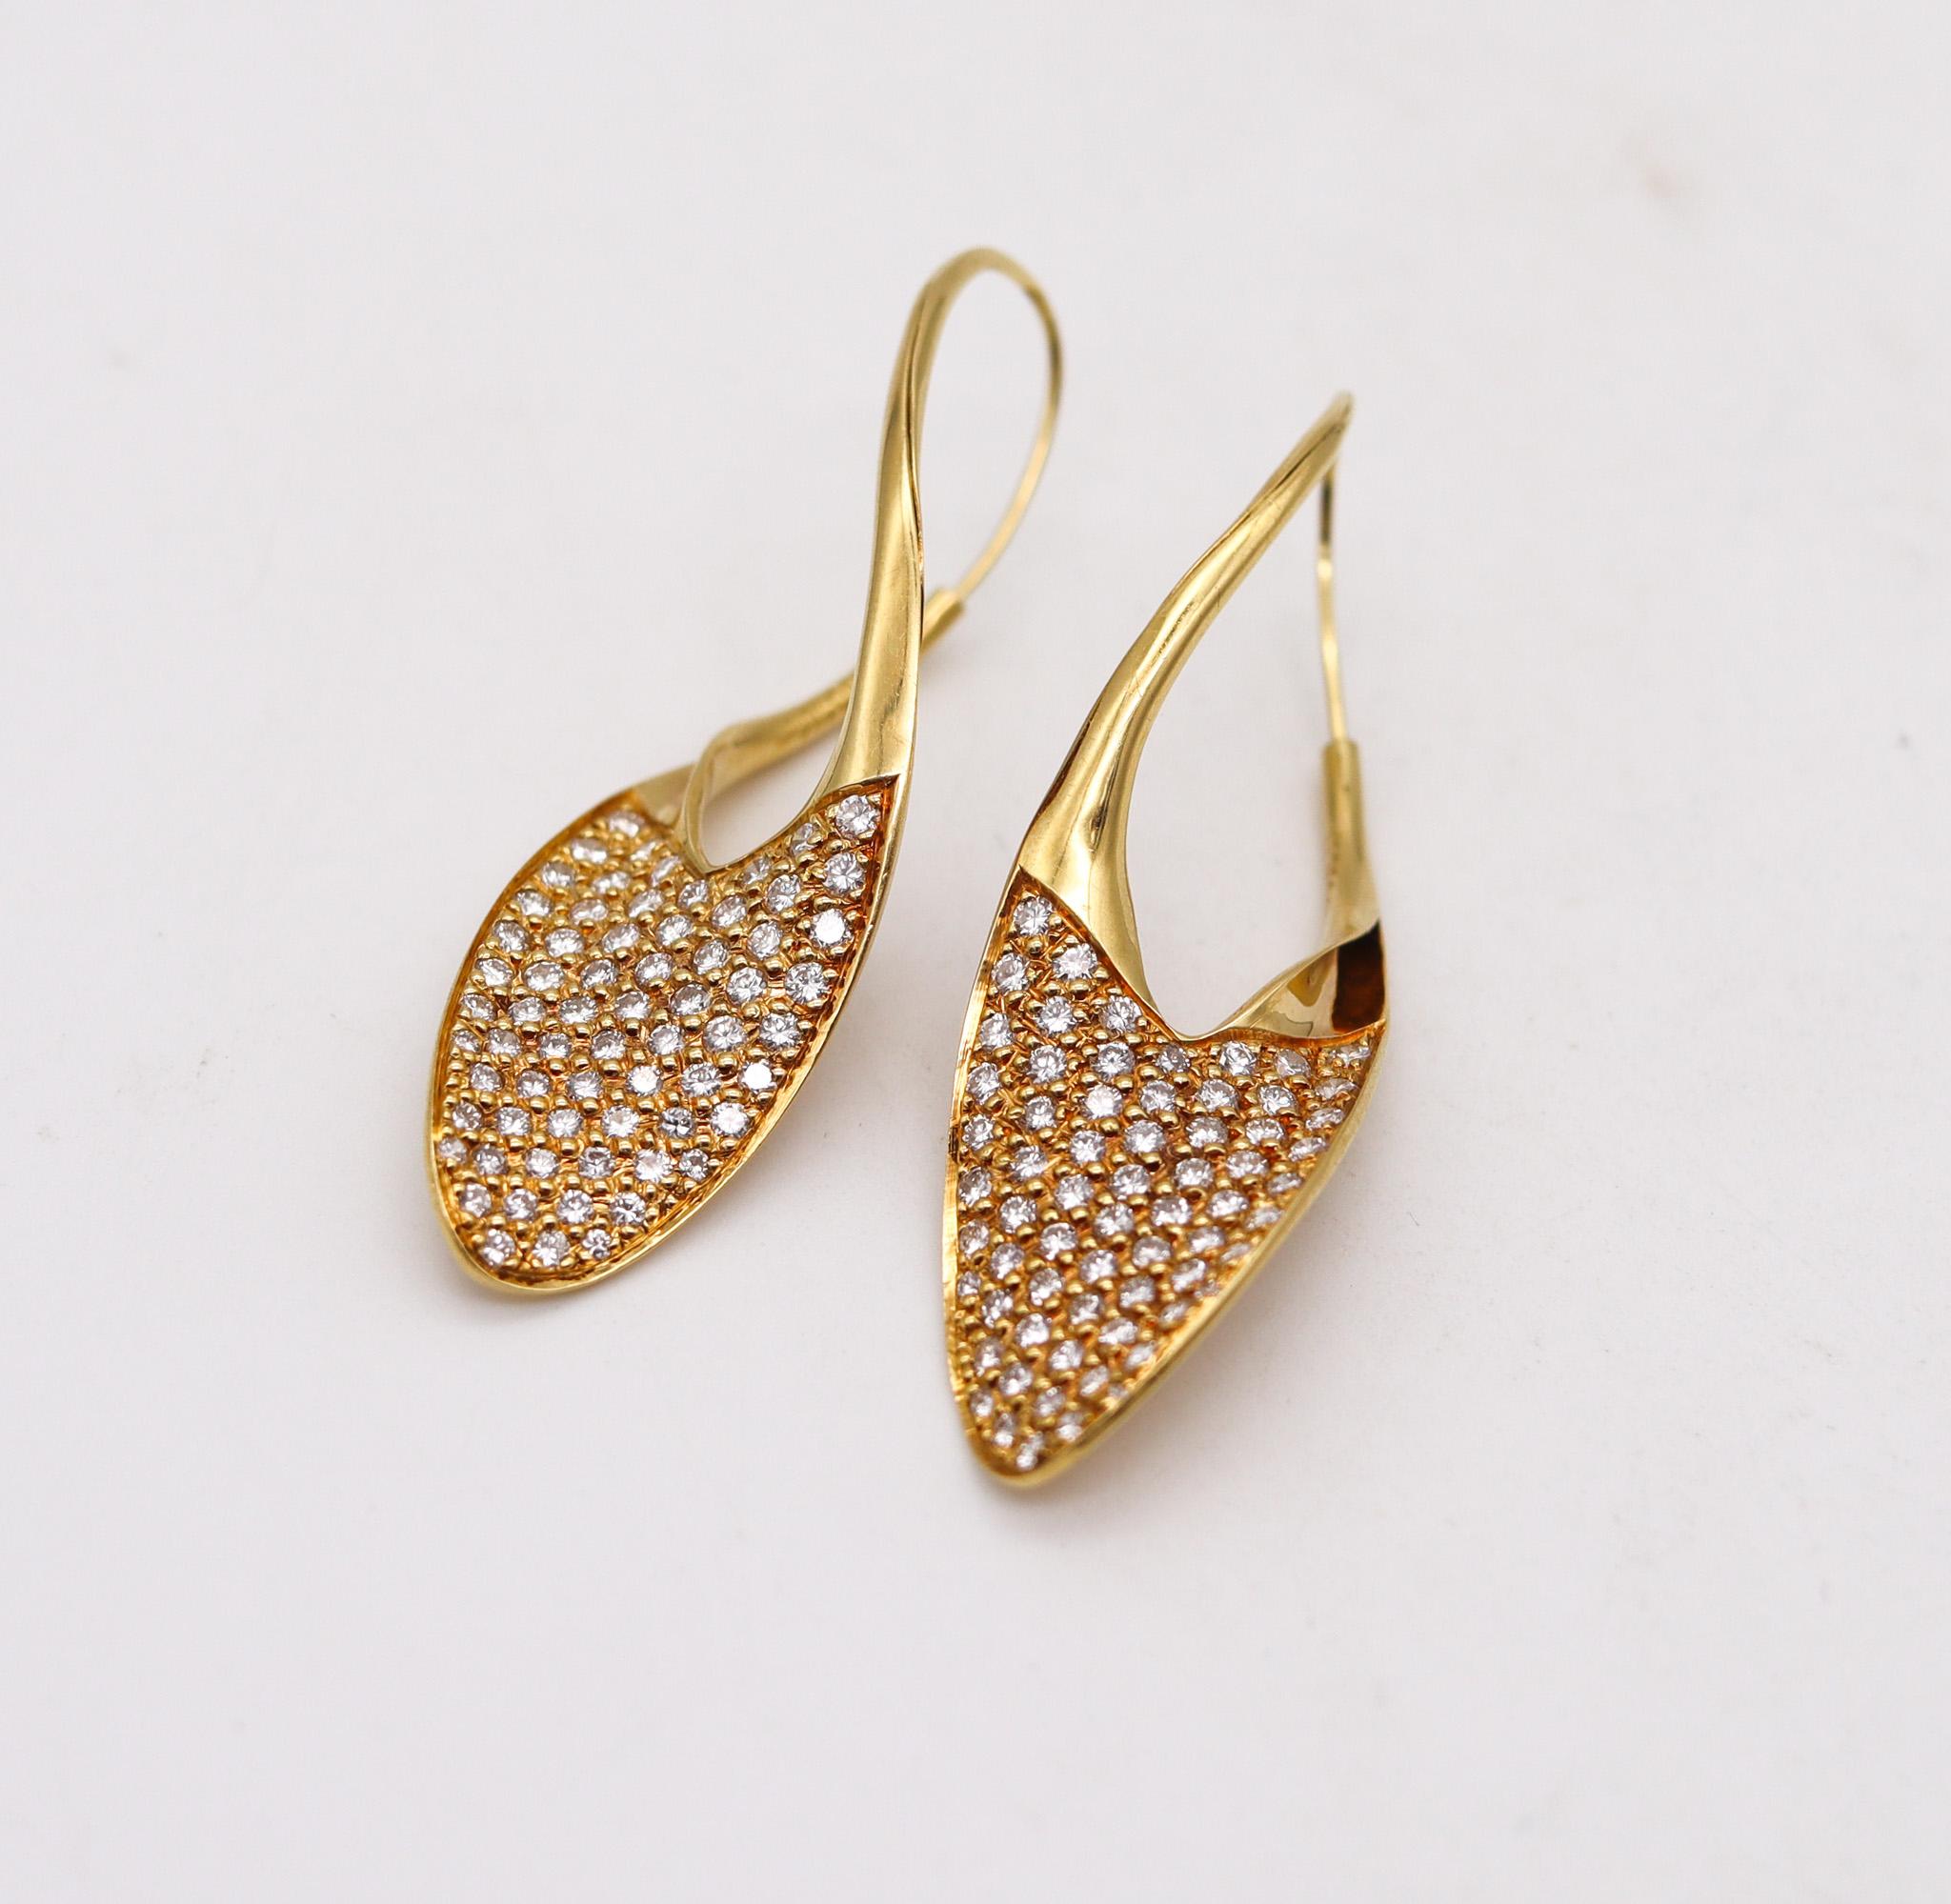 Drop earrings designed by Michael Good.

Fabulous and very rare pair of drop earrings, created in Rockport Maine by the artist goldsmith Michael Good, back in the 1990's. These beautiful unusual pair has been crafted in the shapes of an aerodynamic